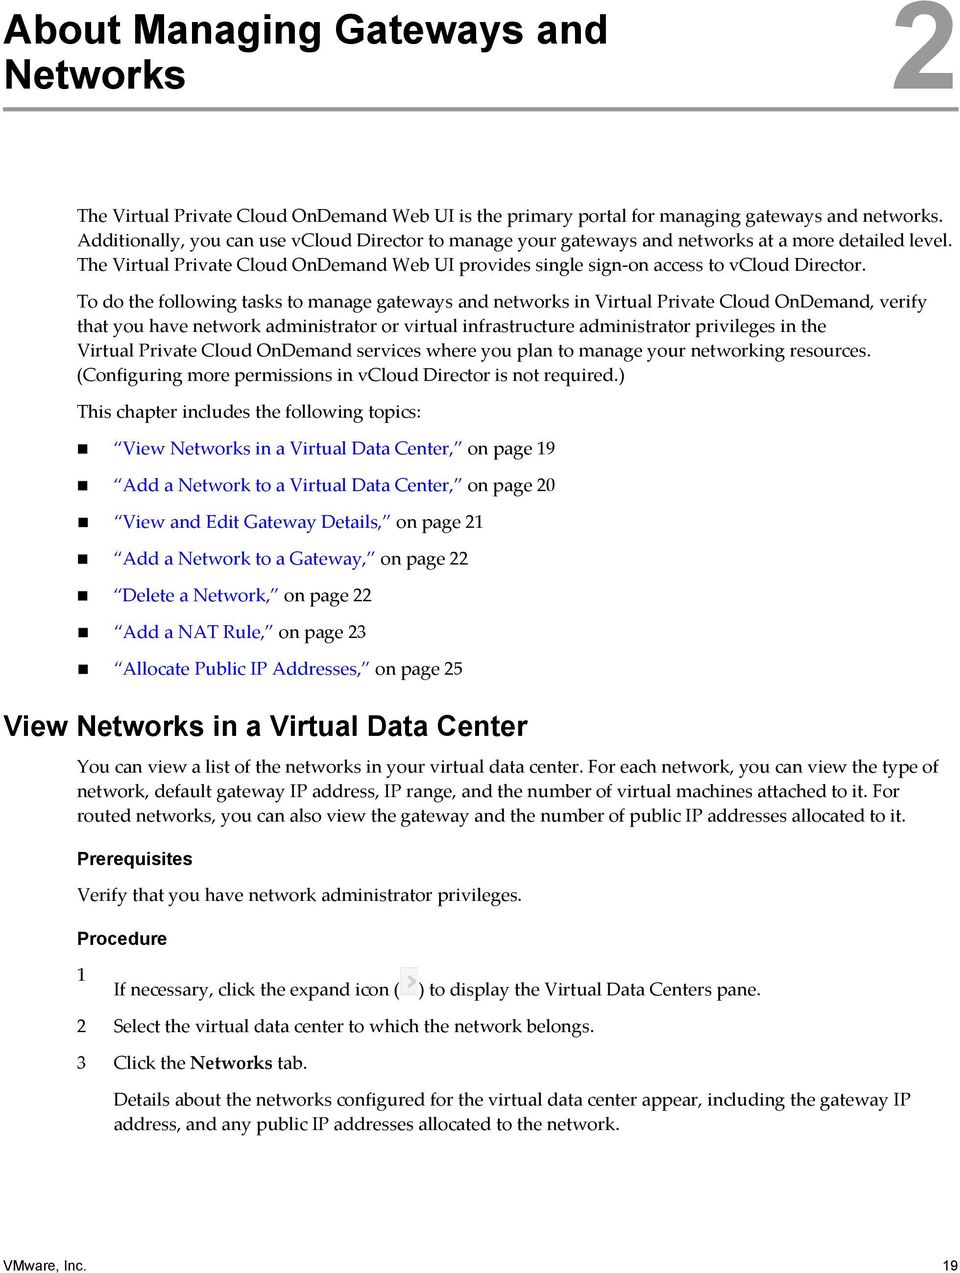 To do the following tasks to manage gateways and networks in Virtual Private Cloud OnDemand, verify that you have network administrator or virtual infrastructure administrator privileges in the